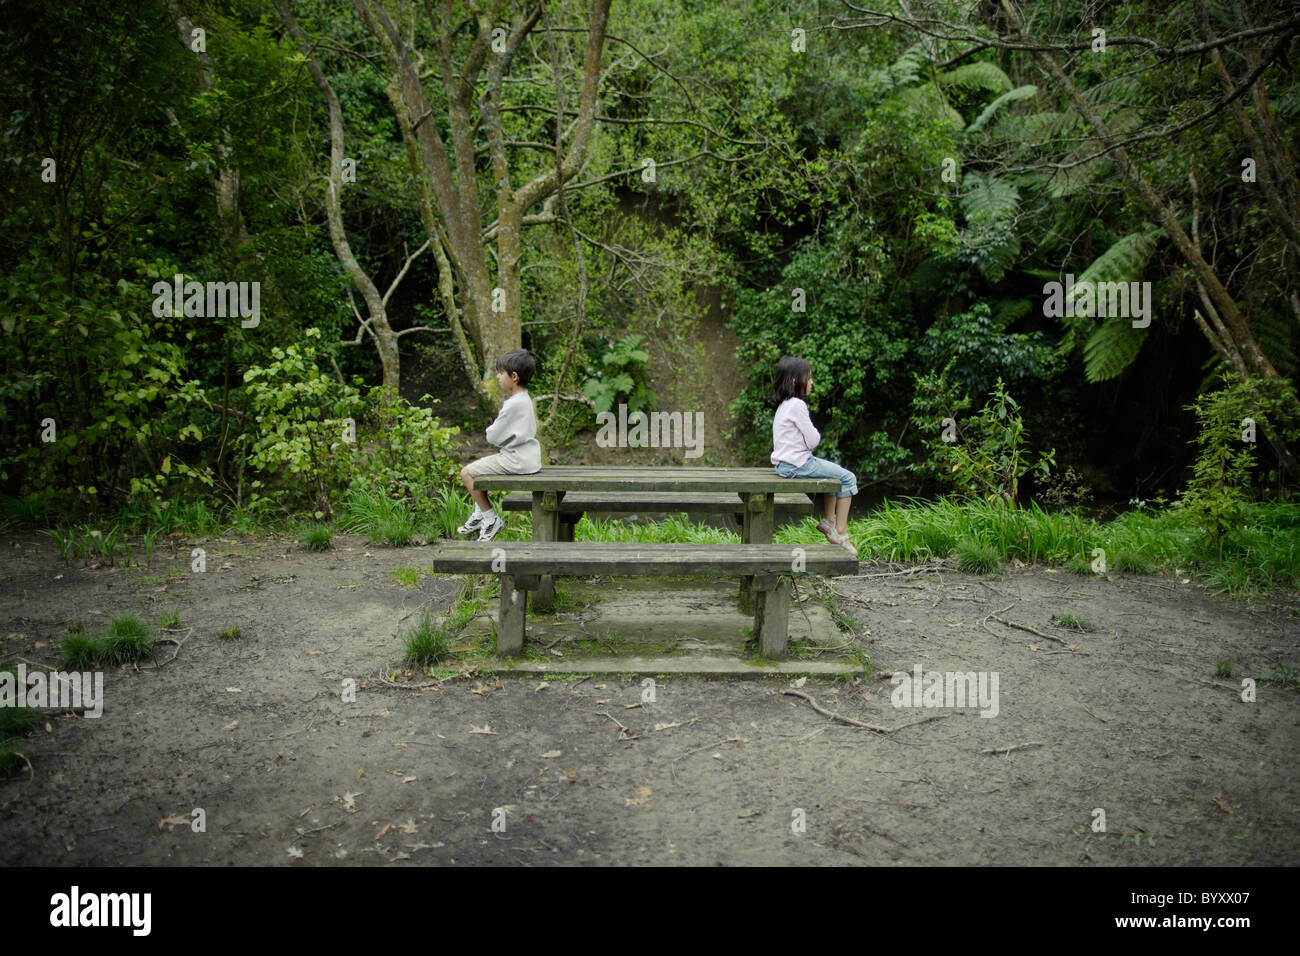 Boy and girl sit facing away from each other on wooden bench in forest, New Zealand. Stock Photo